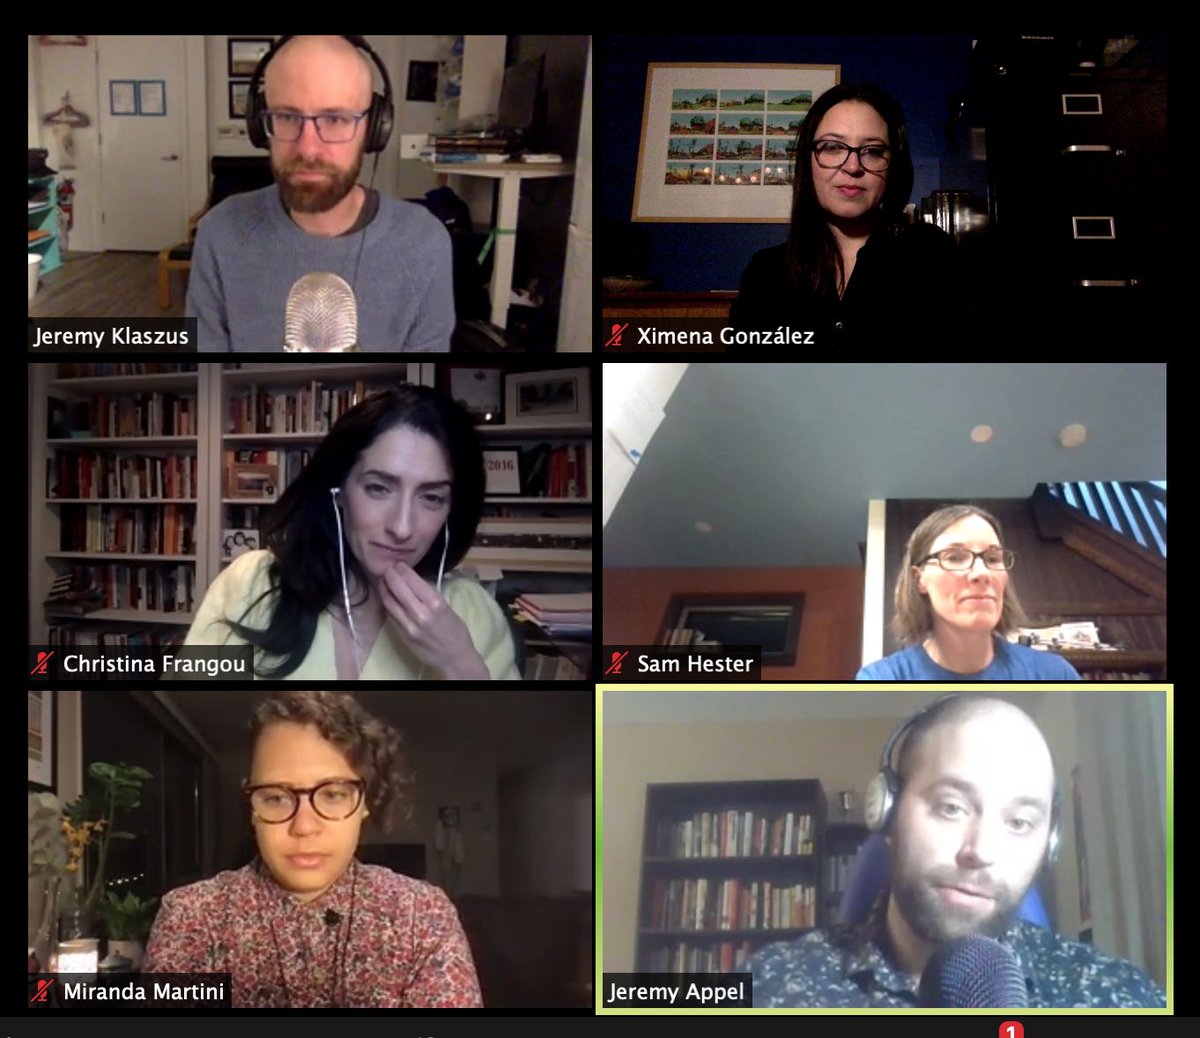 We had our first Sprawlcast Live over Zoom tonight! Thanks to all the Sprawlers who joined us :)